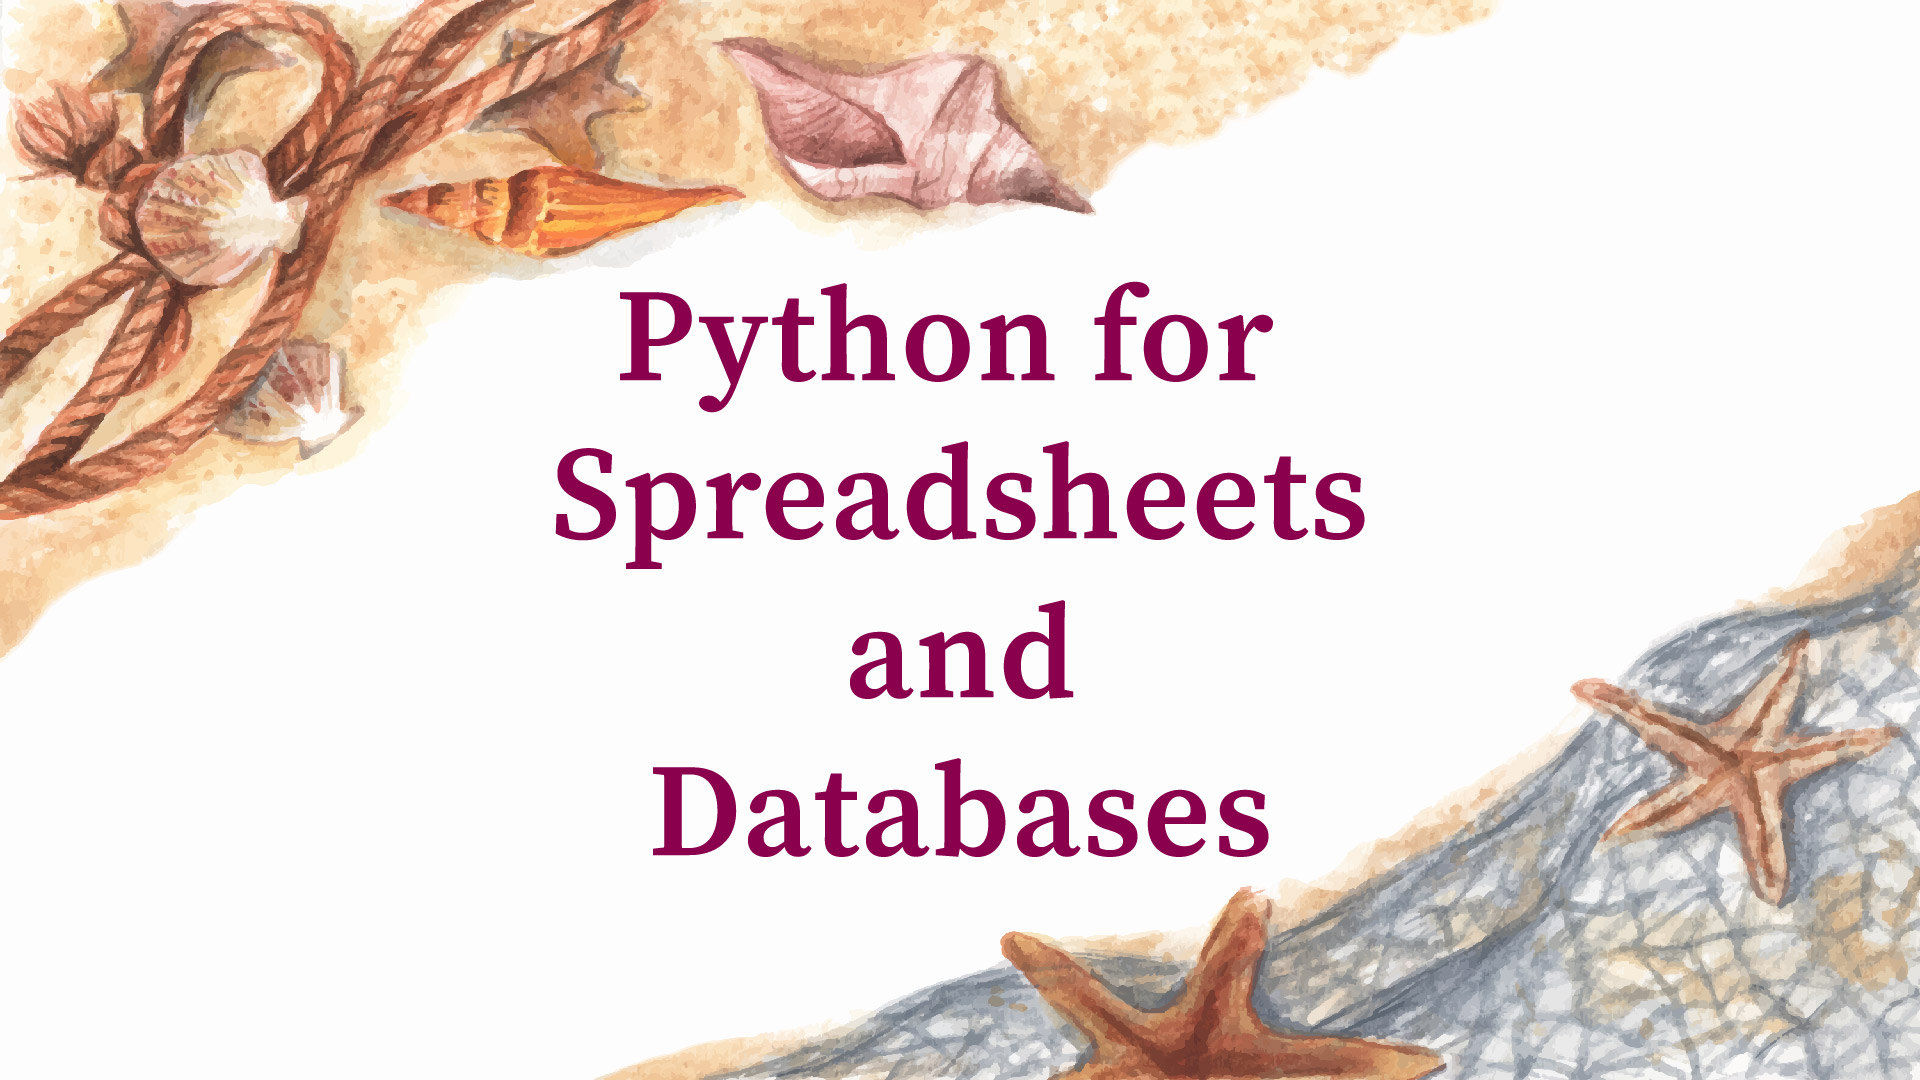 Python for spreadsheets and databases